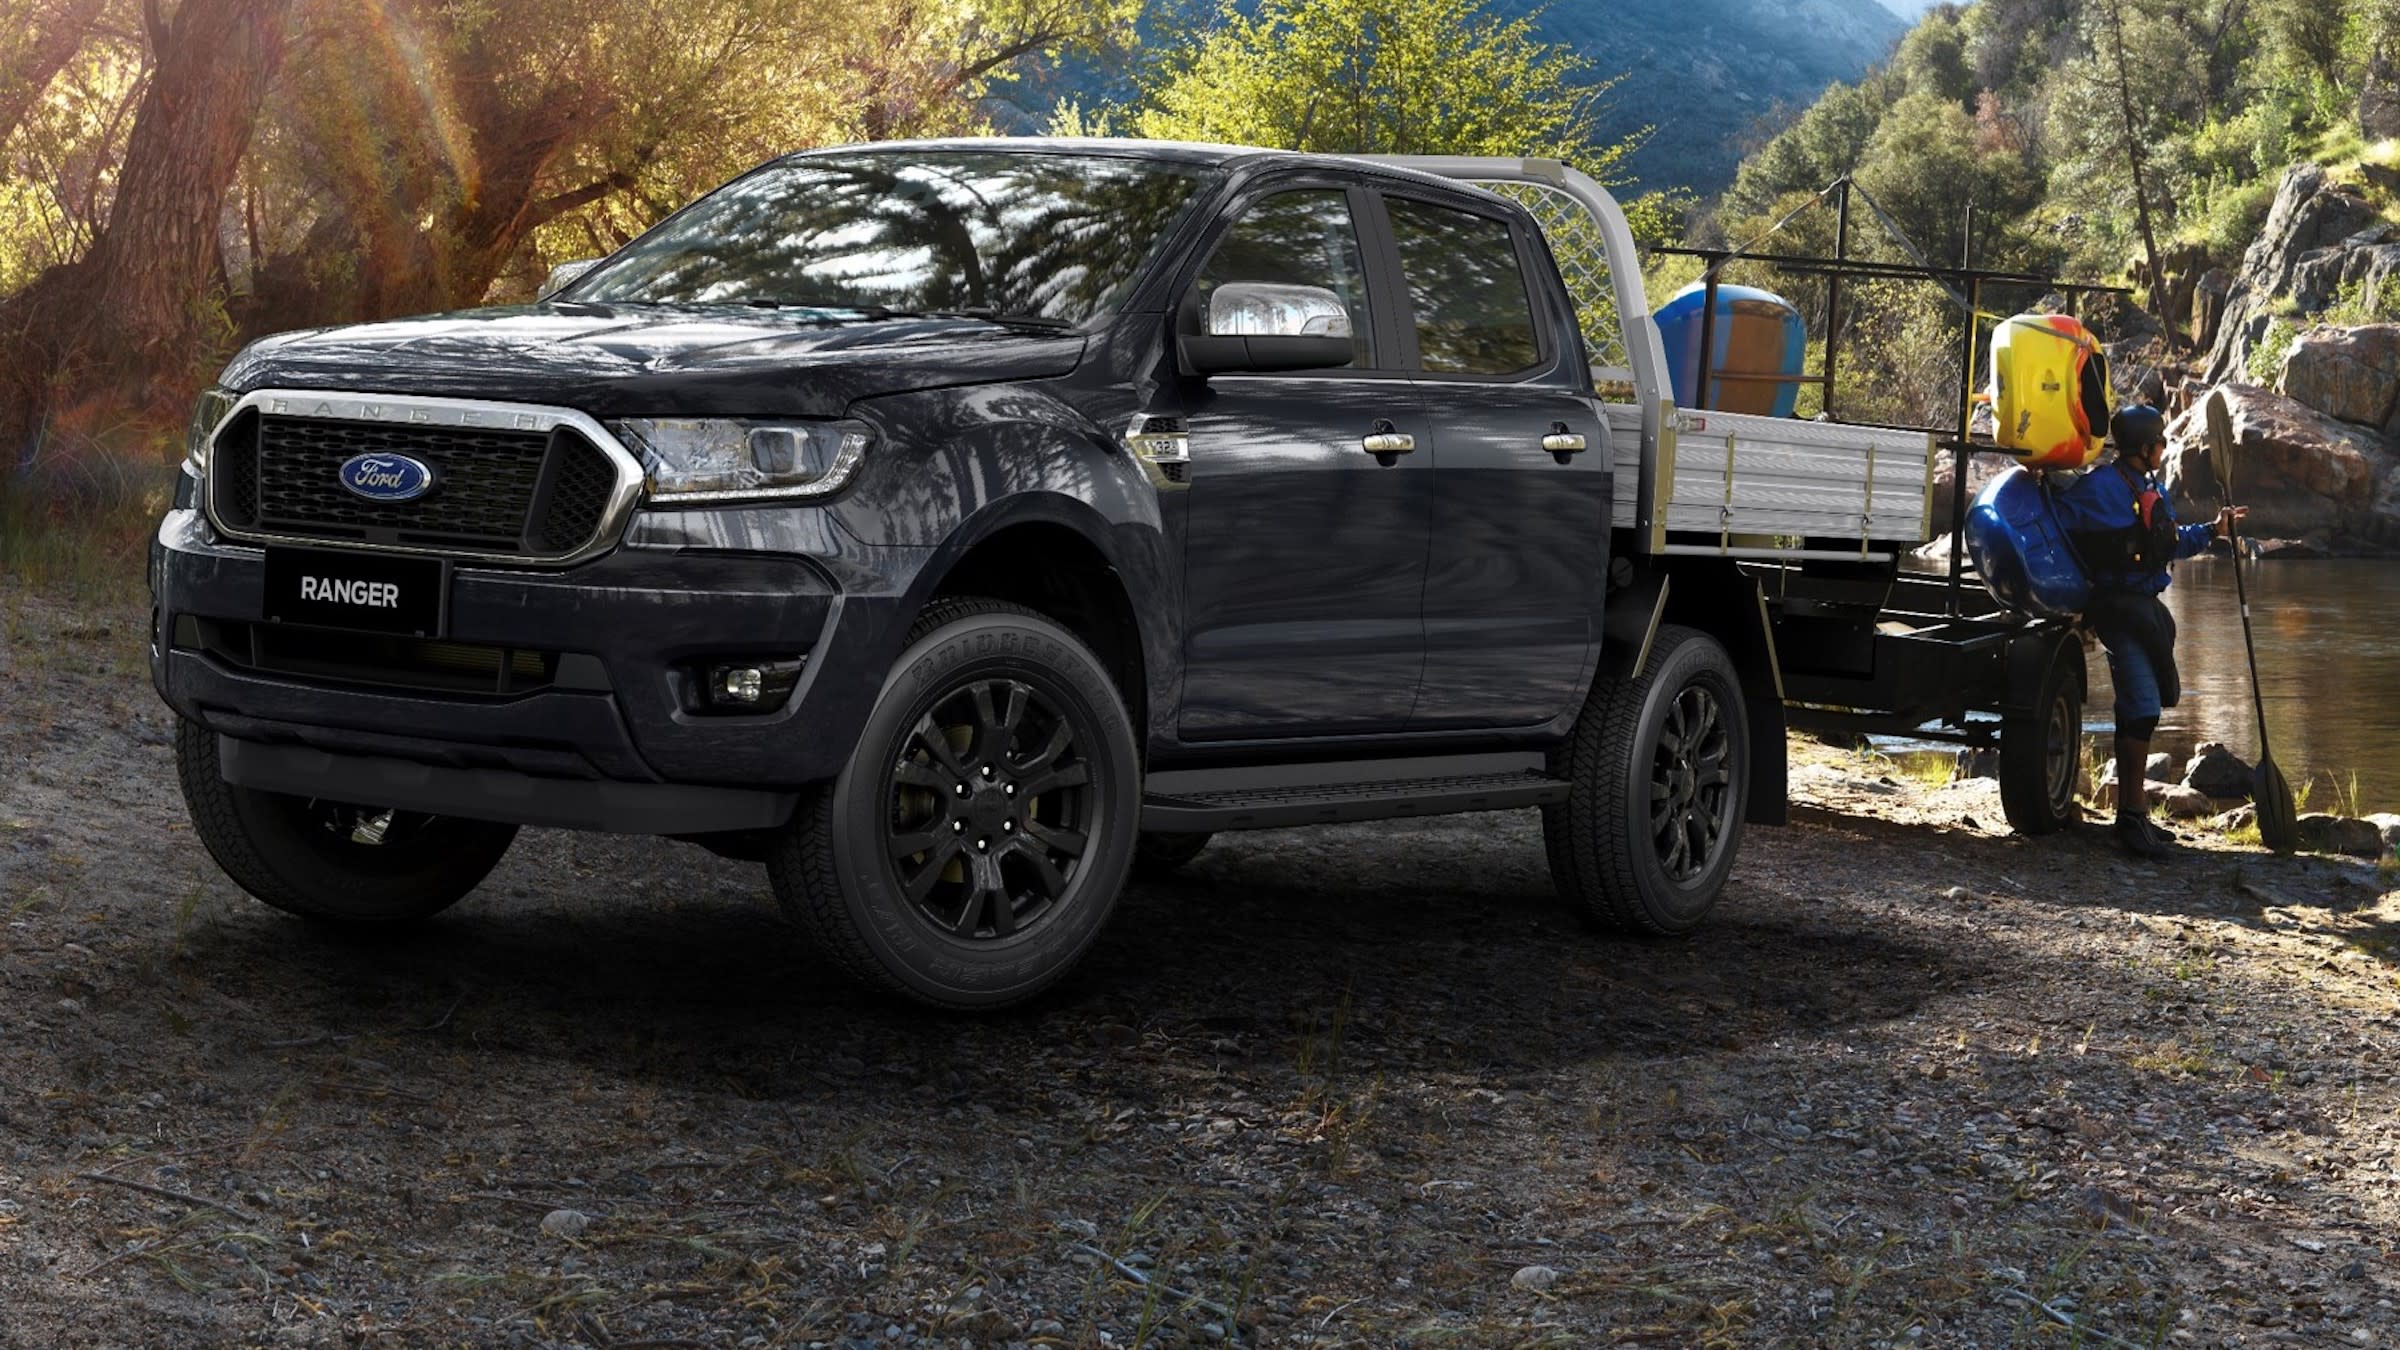 2021 Ford Ranger Xlt Towing Capacity - New Cars Review